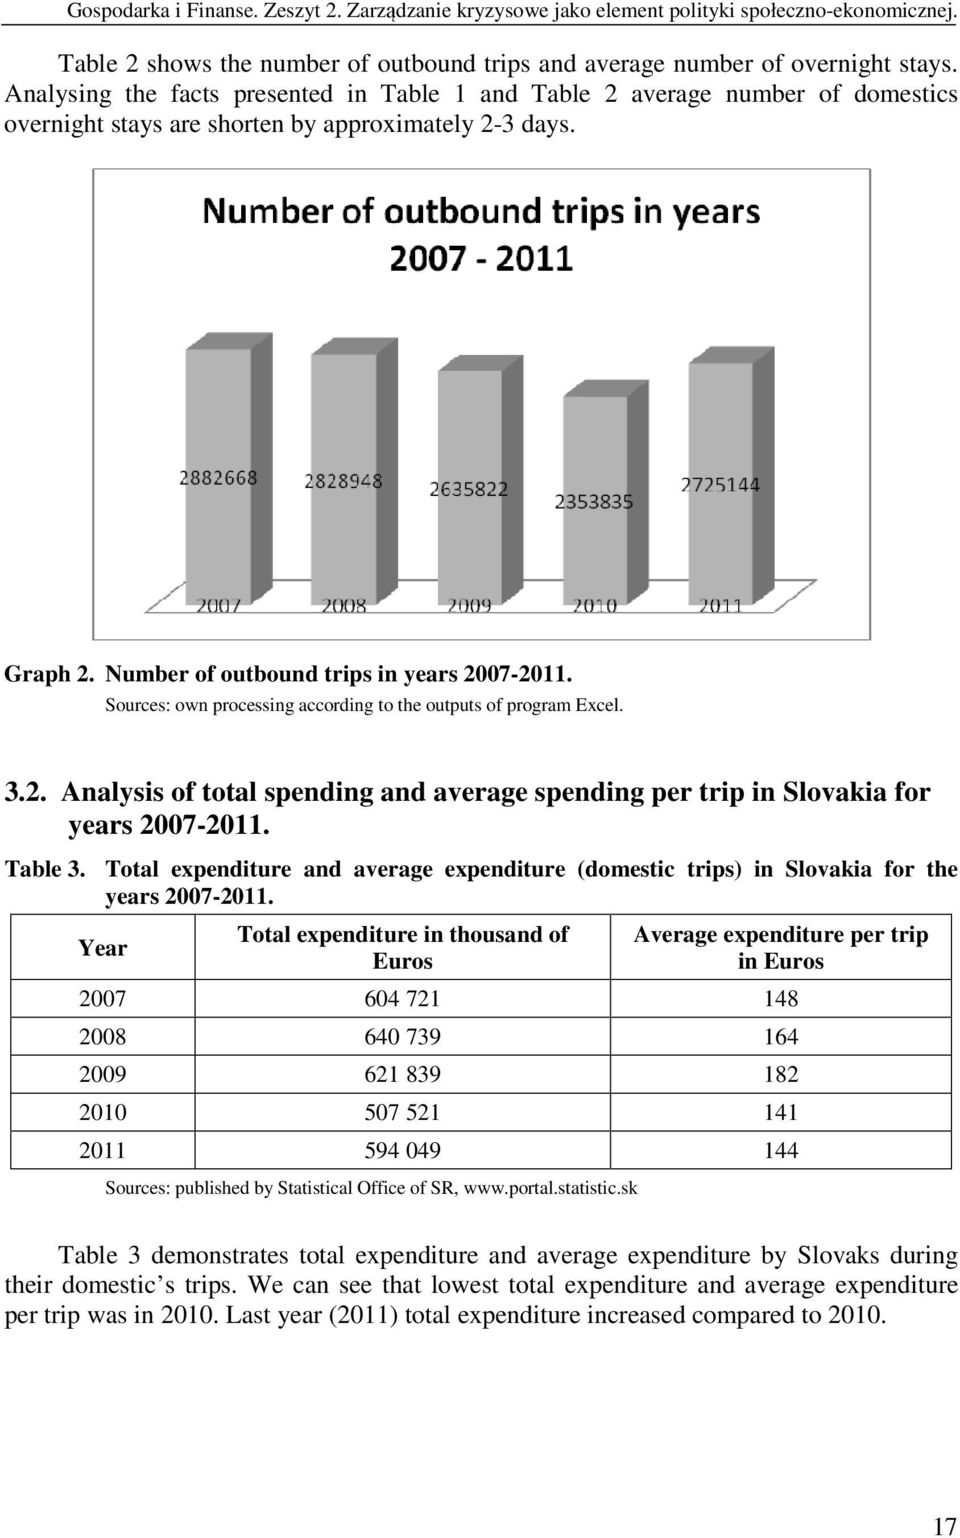 Sources: own processing according to the outputs of program Excel. 3.2. Analysis of total spending and average spending per trip in Slovakia for years 2007-2011. Table 3.